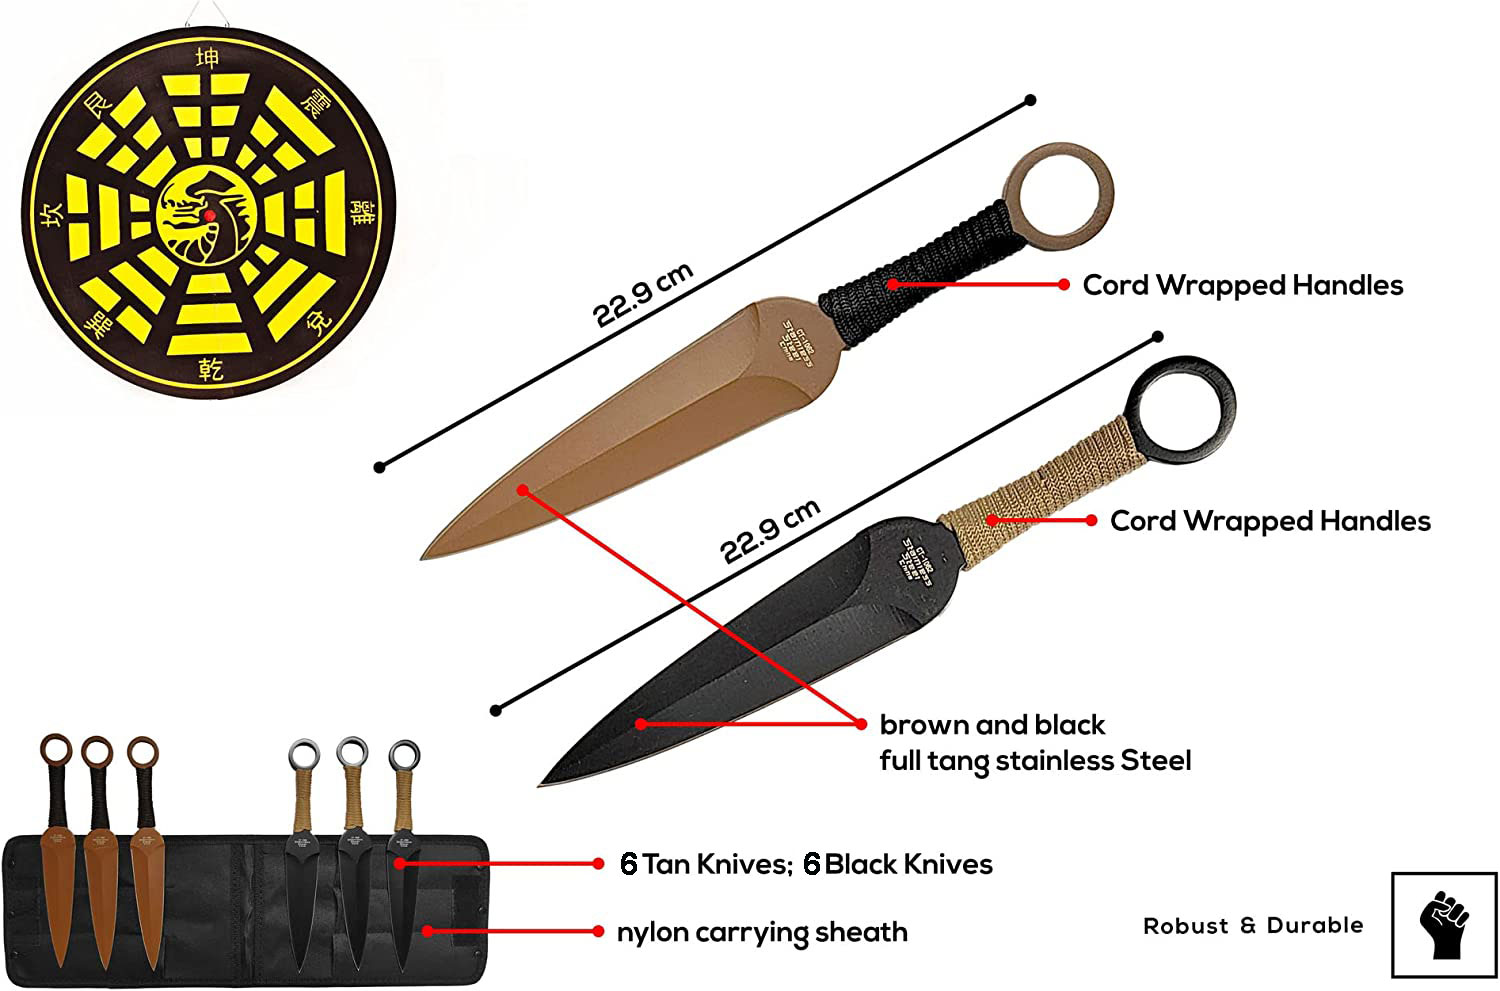 12 Throwing Knives with Target